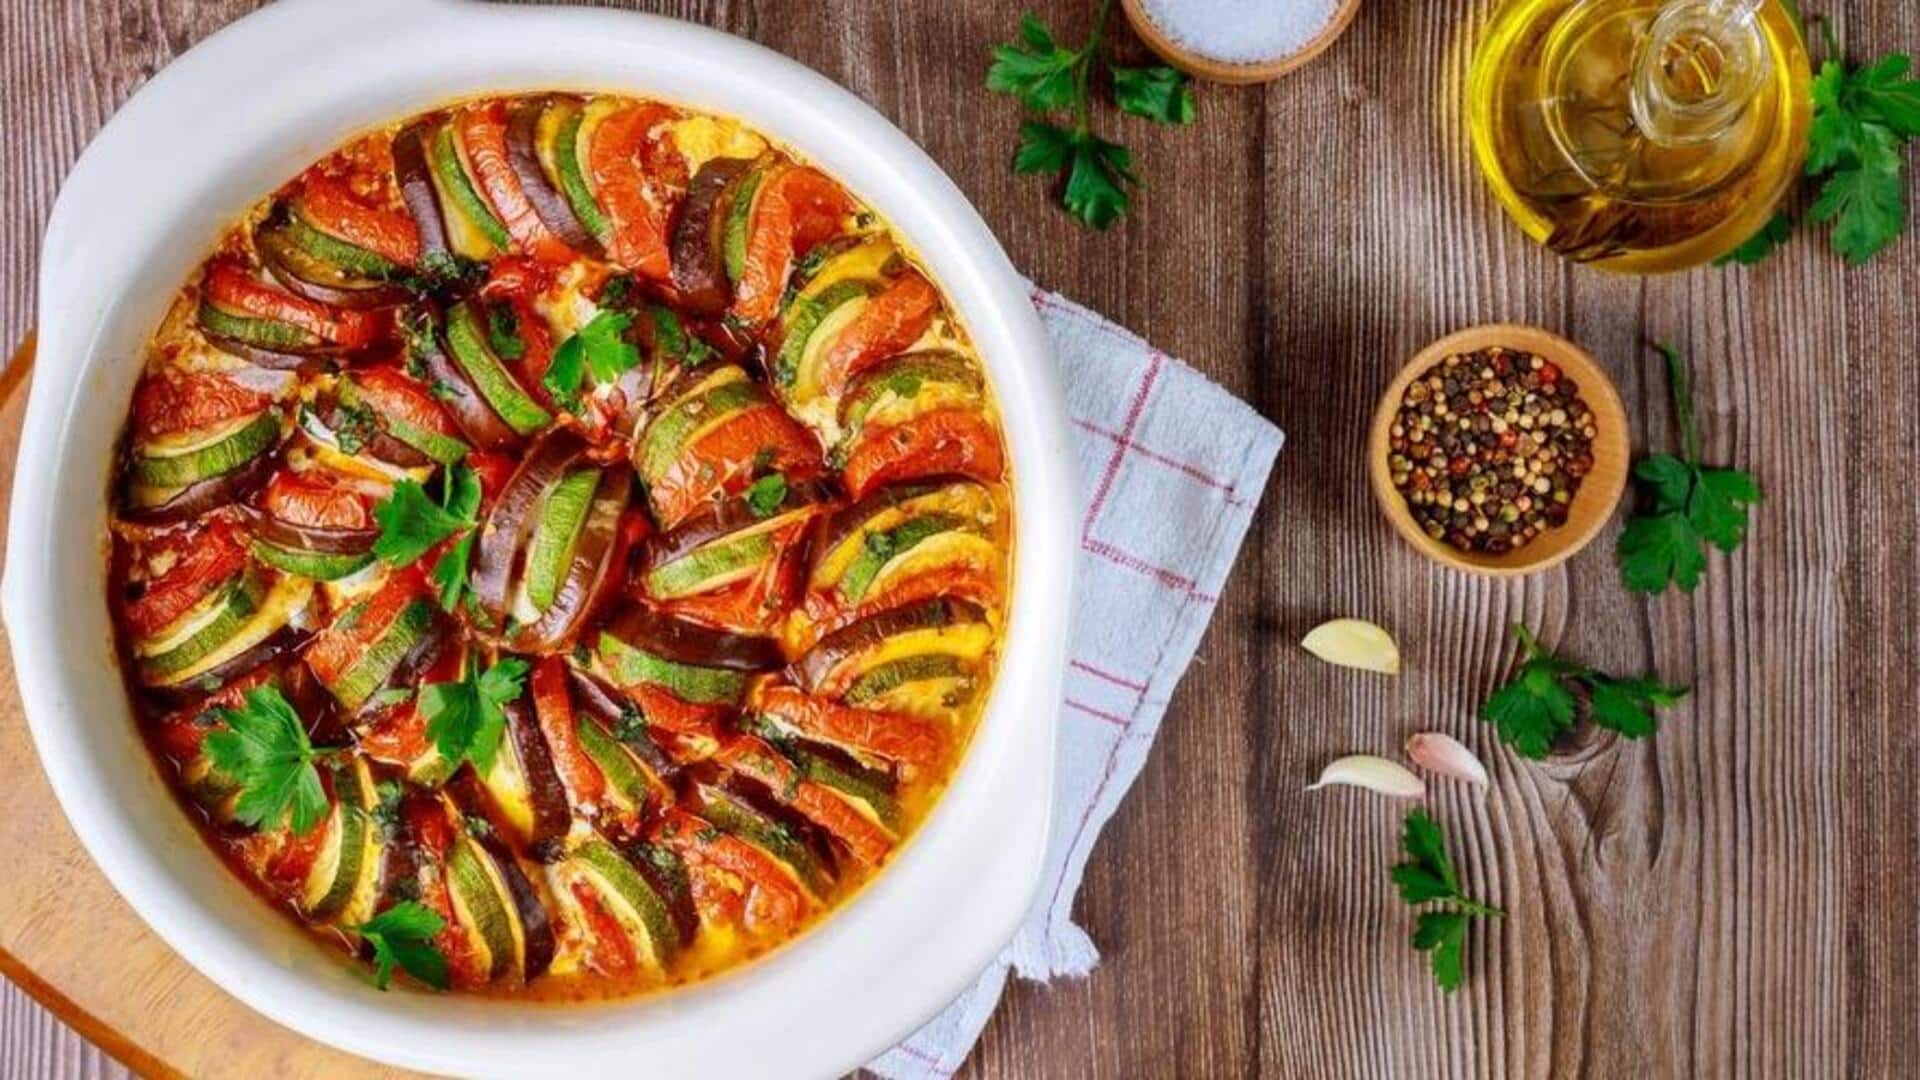 This French ratatouille recipe will surely impress your guests